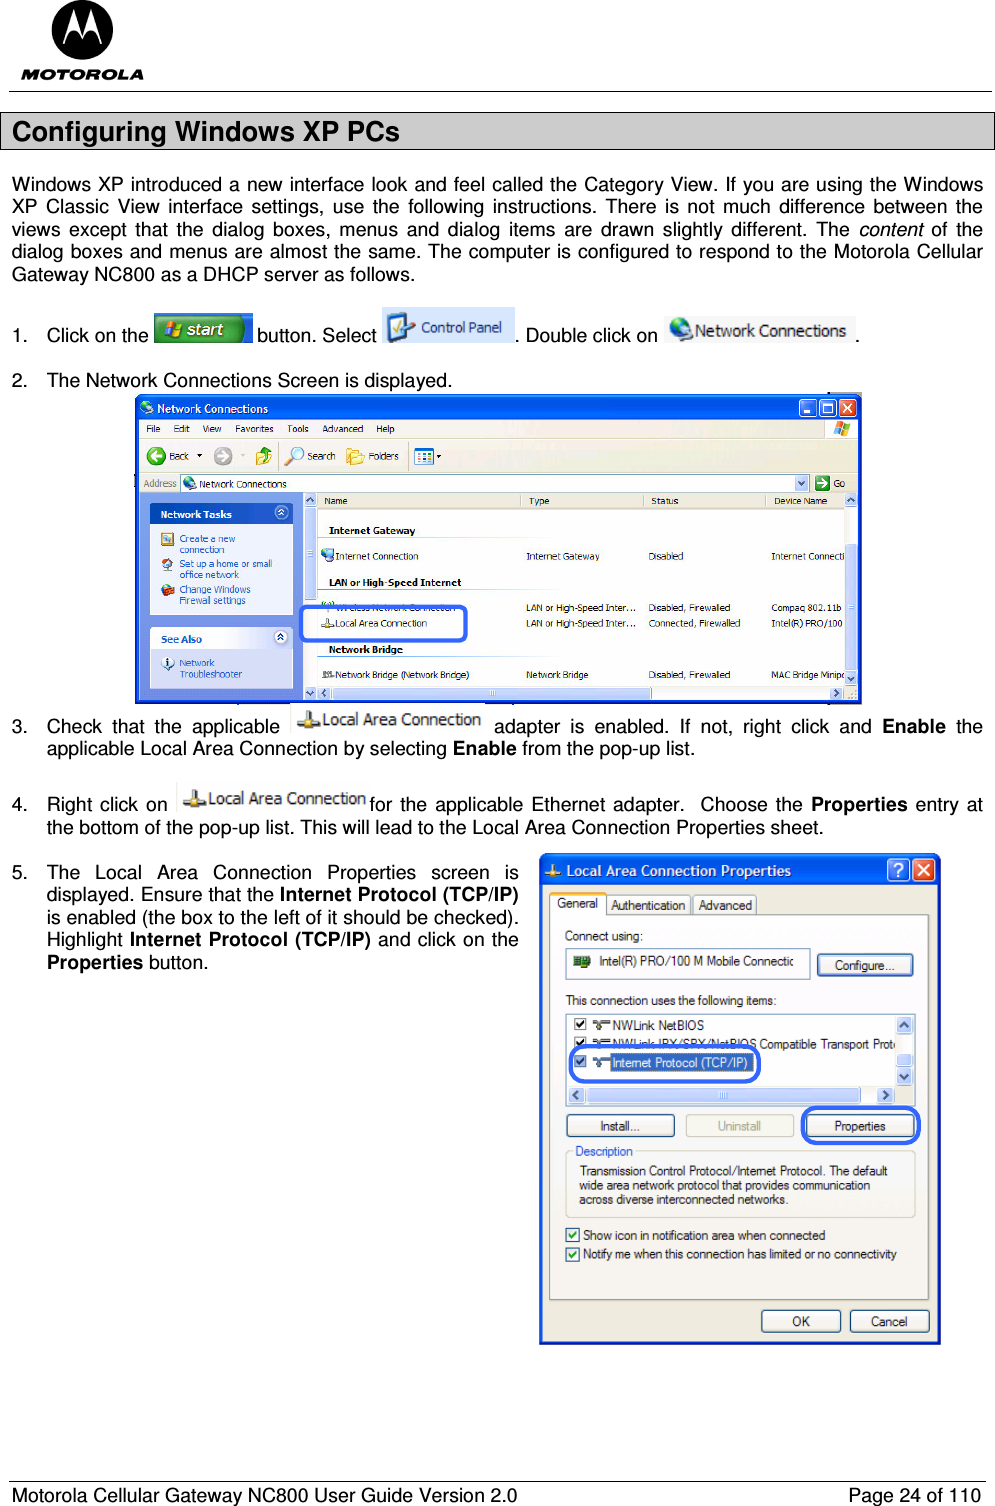  Motorola Cellular Gateway NC800 User Guide Version 2.0     Page 24 of 110  Configuring Windows XP PCs Windows XP introduced a new interface look and feel called the Category View. If you are using the Windows XP Classic  View interface settings, use  the  following  instructions.  There  is not  much  difference  between  the views  except  that  the  dialog  boxes,  menus  and  dialog  items  are  drawn  slightly  different.  The  content  of  the dialog boxes and menus are almost the same. The computer is configured to respond to the Motorola Cellular Gateway NC800 as a DHCP server as follows.  1.  Click on the   button. Select  . Double click on  .  2.  The Network Connections Screen is displayed.  3.  Check  that  the  applicable    adapter  is  enabled.  If  not,  right  click  and  Enable  the applicable Local Area Connection by selecting Enable from the pop-up list.  4.  Right click on  for the applicable Ethernet adapter.  Choose the Properties entry at the bottom of the pop-up list. This will lead to the Local Area Connection Properties sheet.   5.  The  Local  Area  Connection  Properties  screen  is displayed. Ensure that the Internet Protocol (TCP/IP) is enabled (the box to the left of it should be checked). Highlight Internet Protocol (TCP/IP) and click on the Properties button.                      